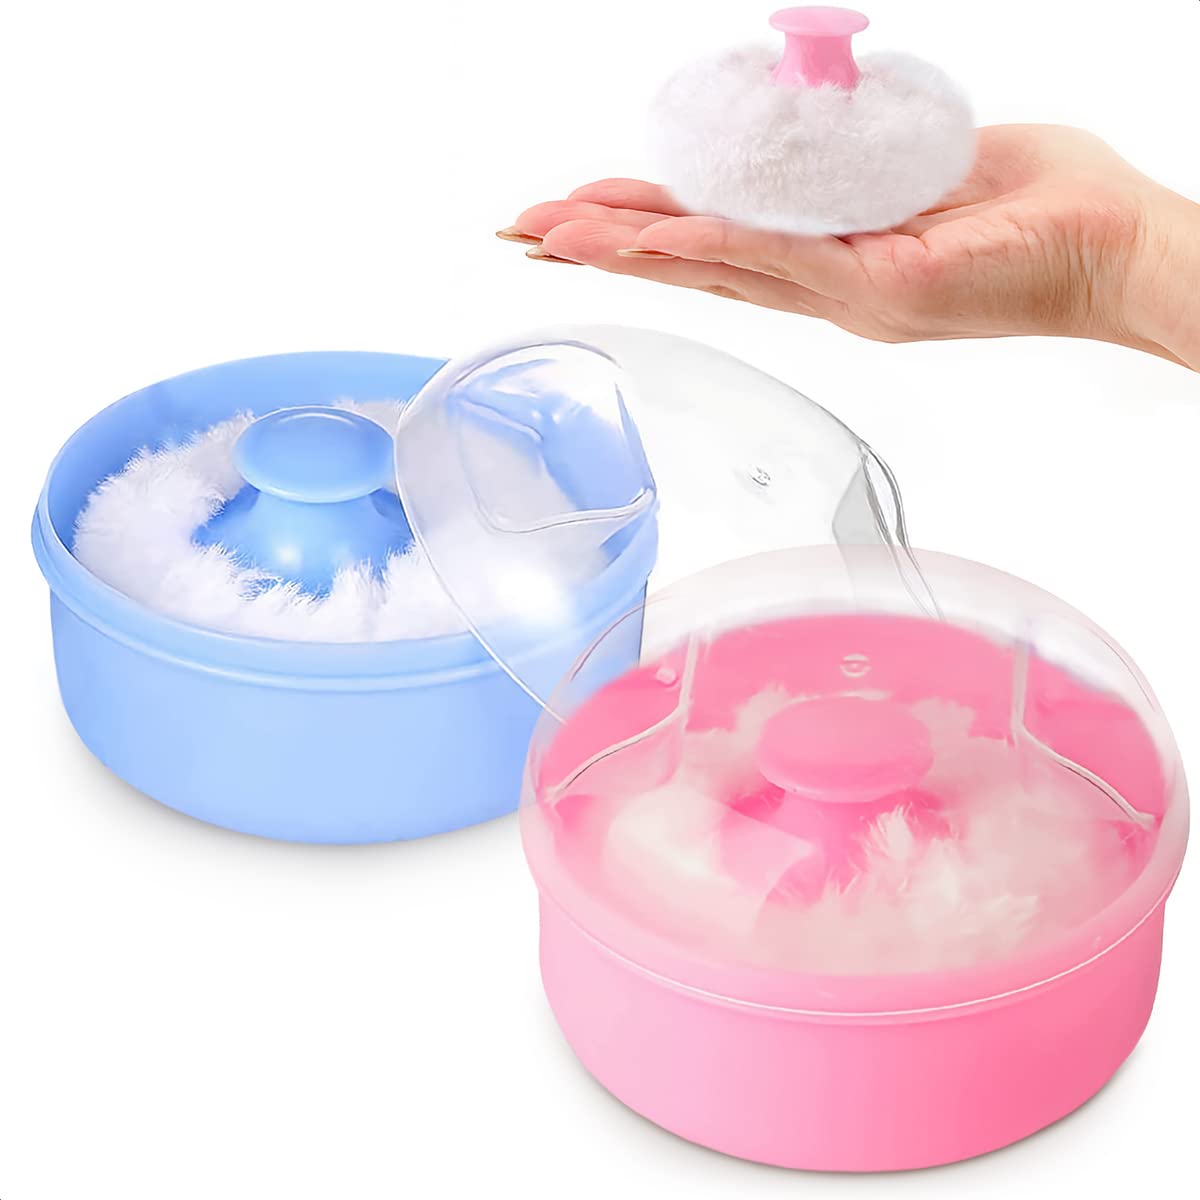 After-Bath Body Powder Box ,Empty Powder Case Powder Puff Container Holder for Home and Travel Cosmetic Container (Blue)